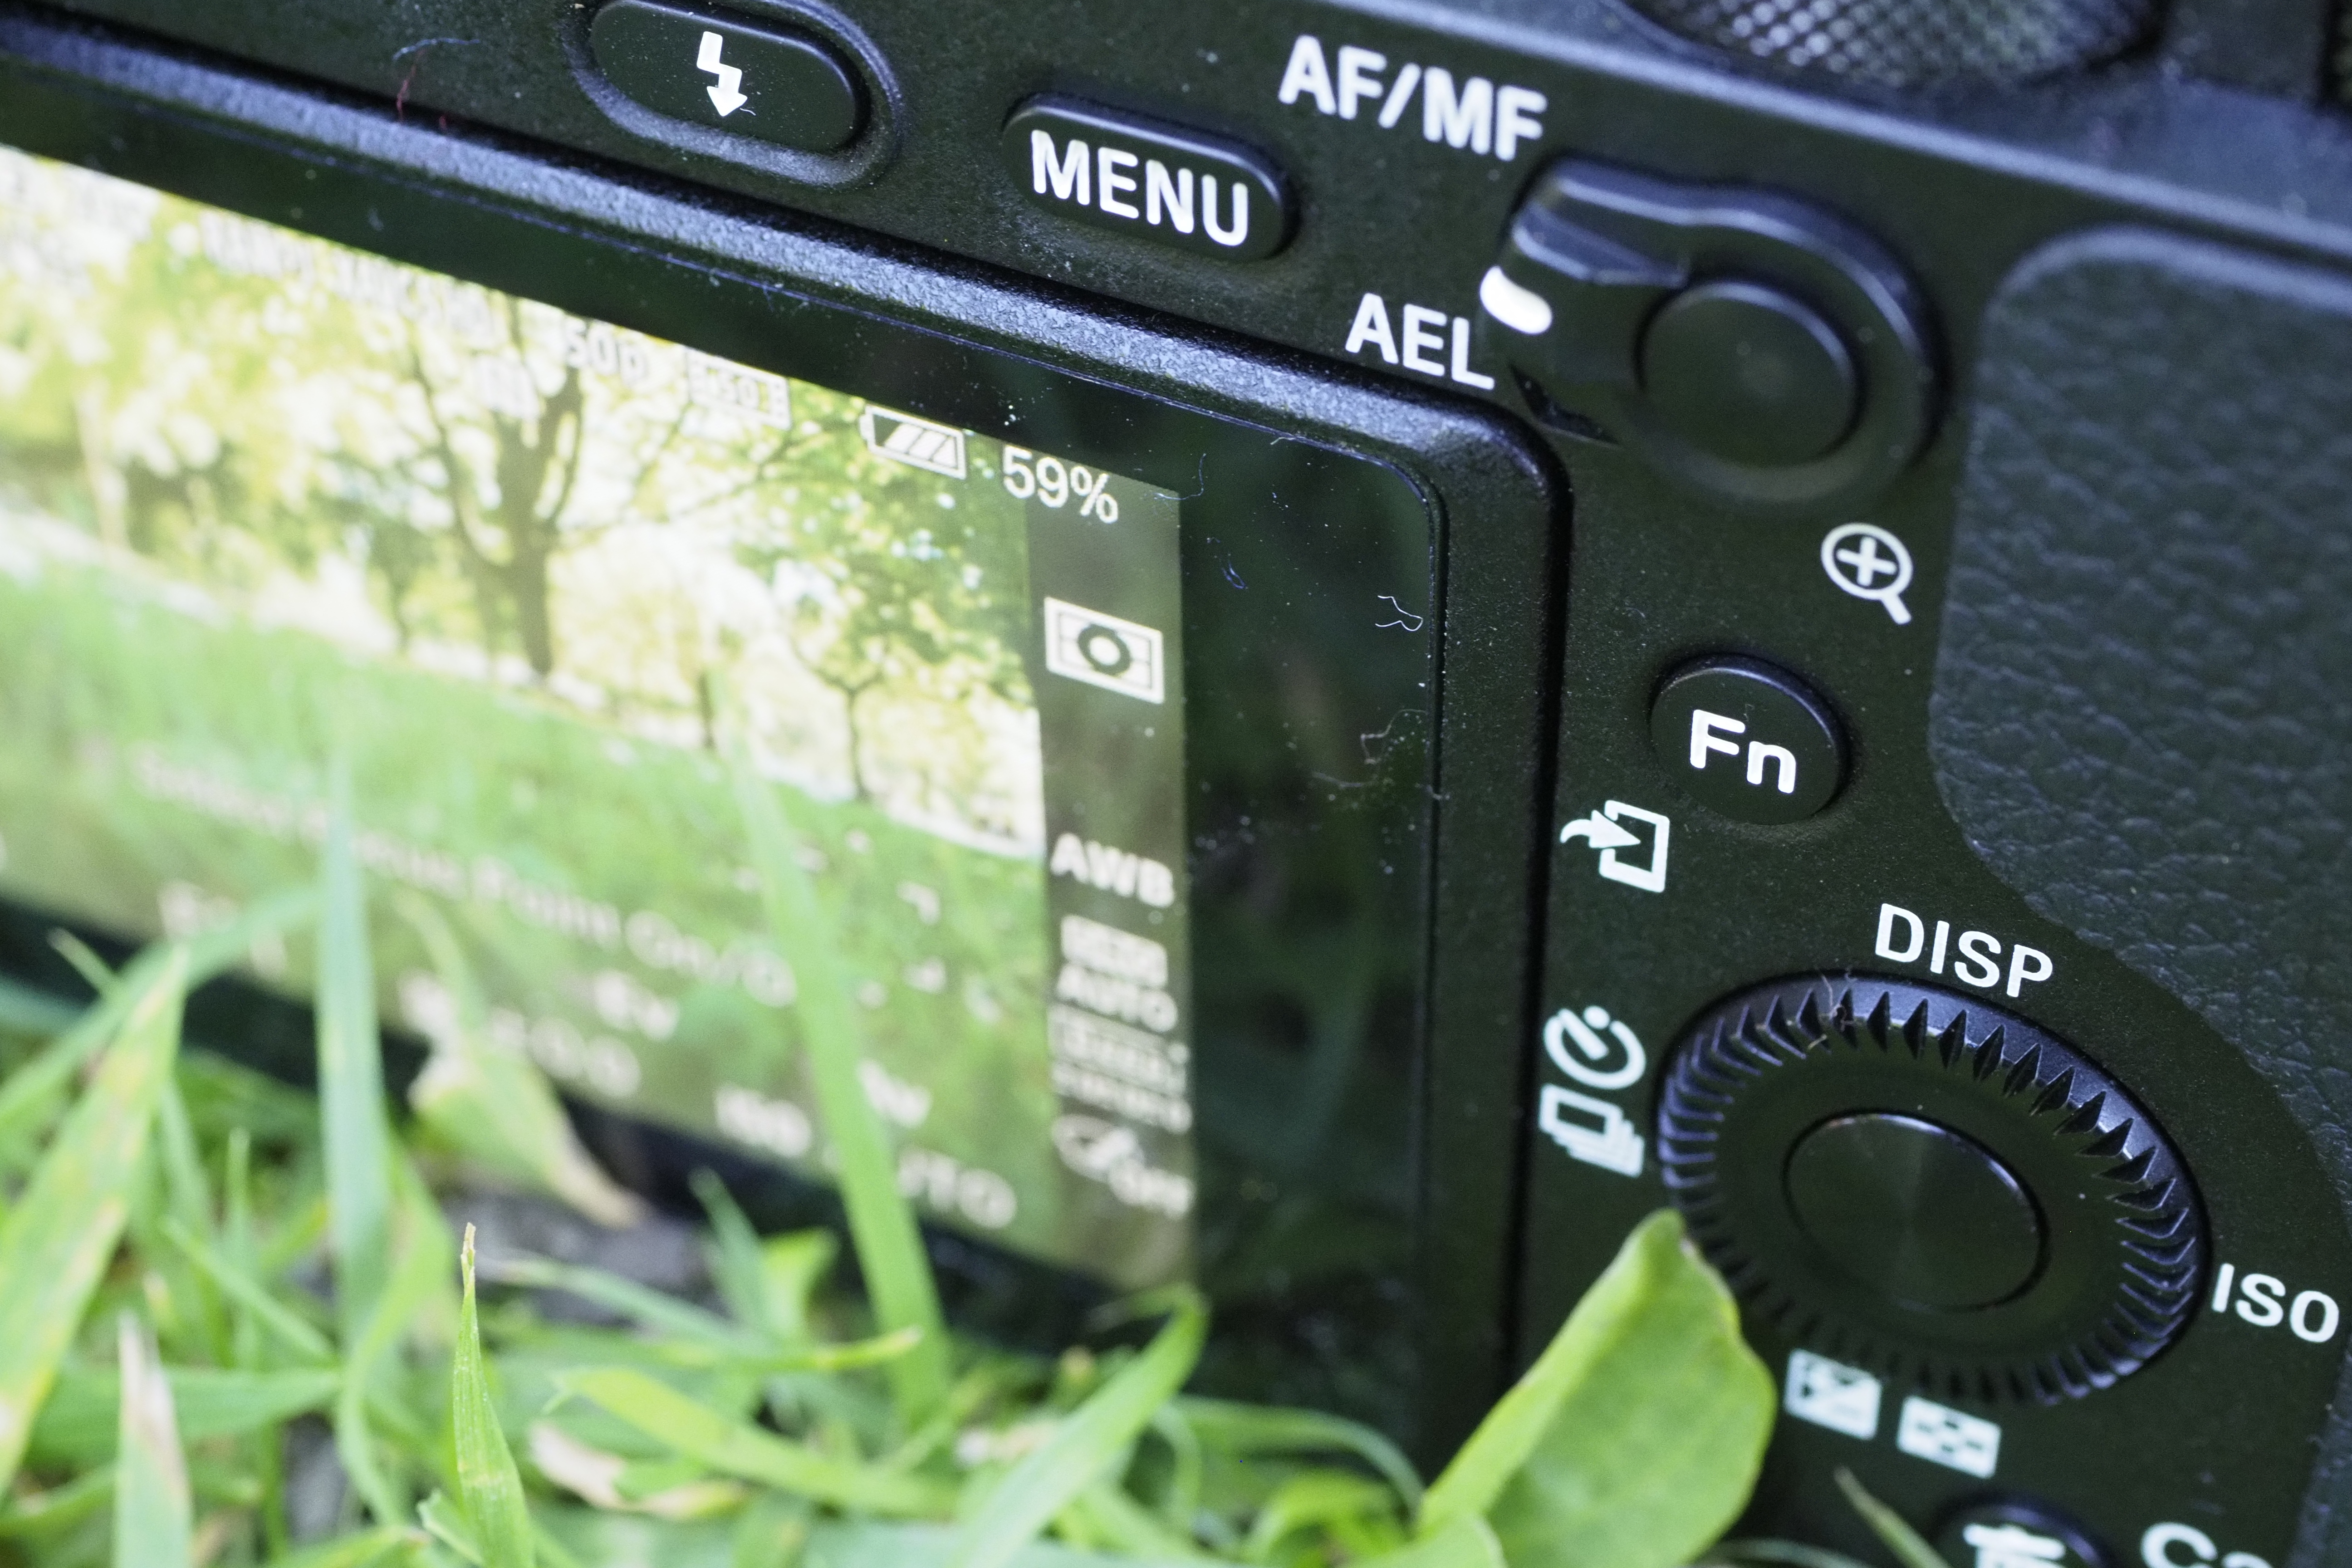 Sony A6500 controls: quick access and customisation galore